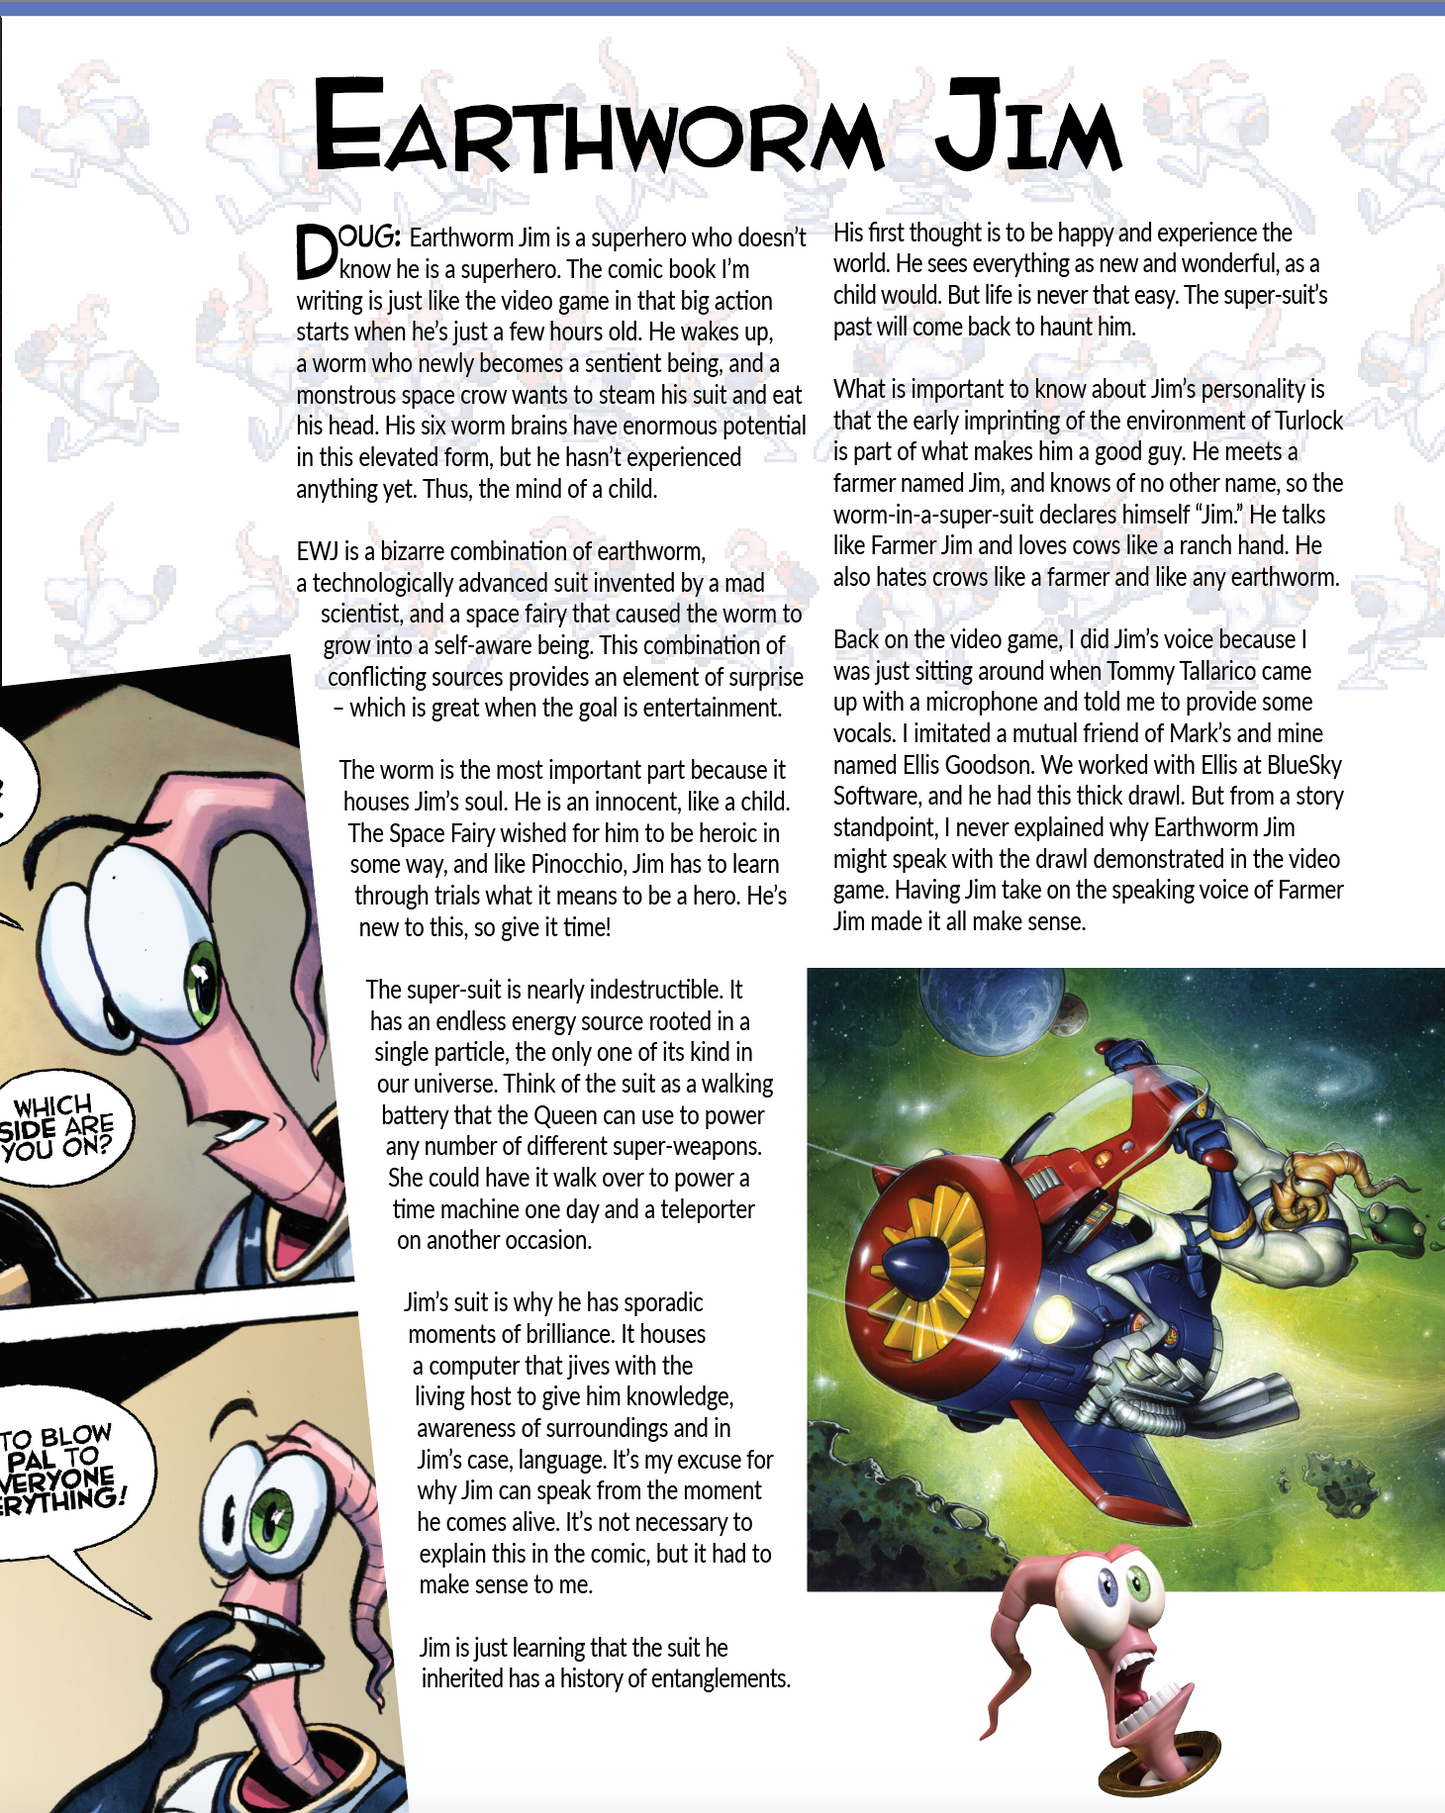 The Making Of Earthworm Jim